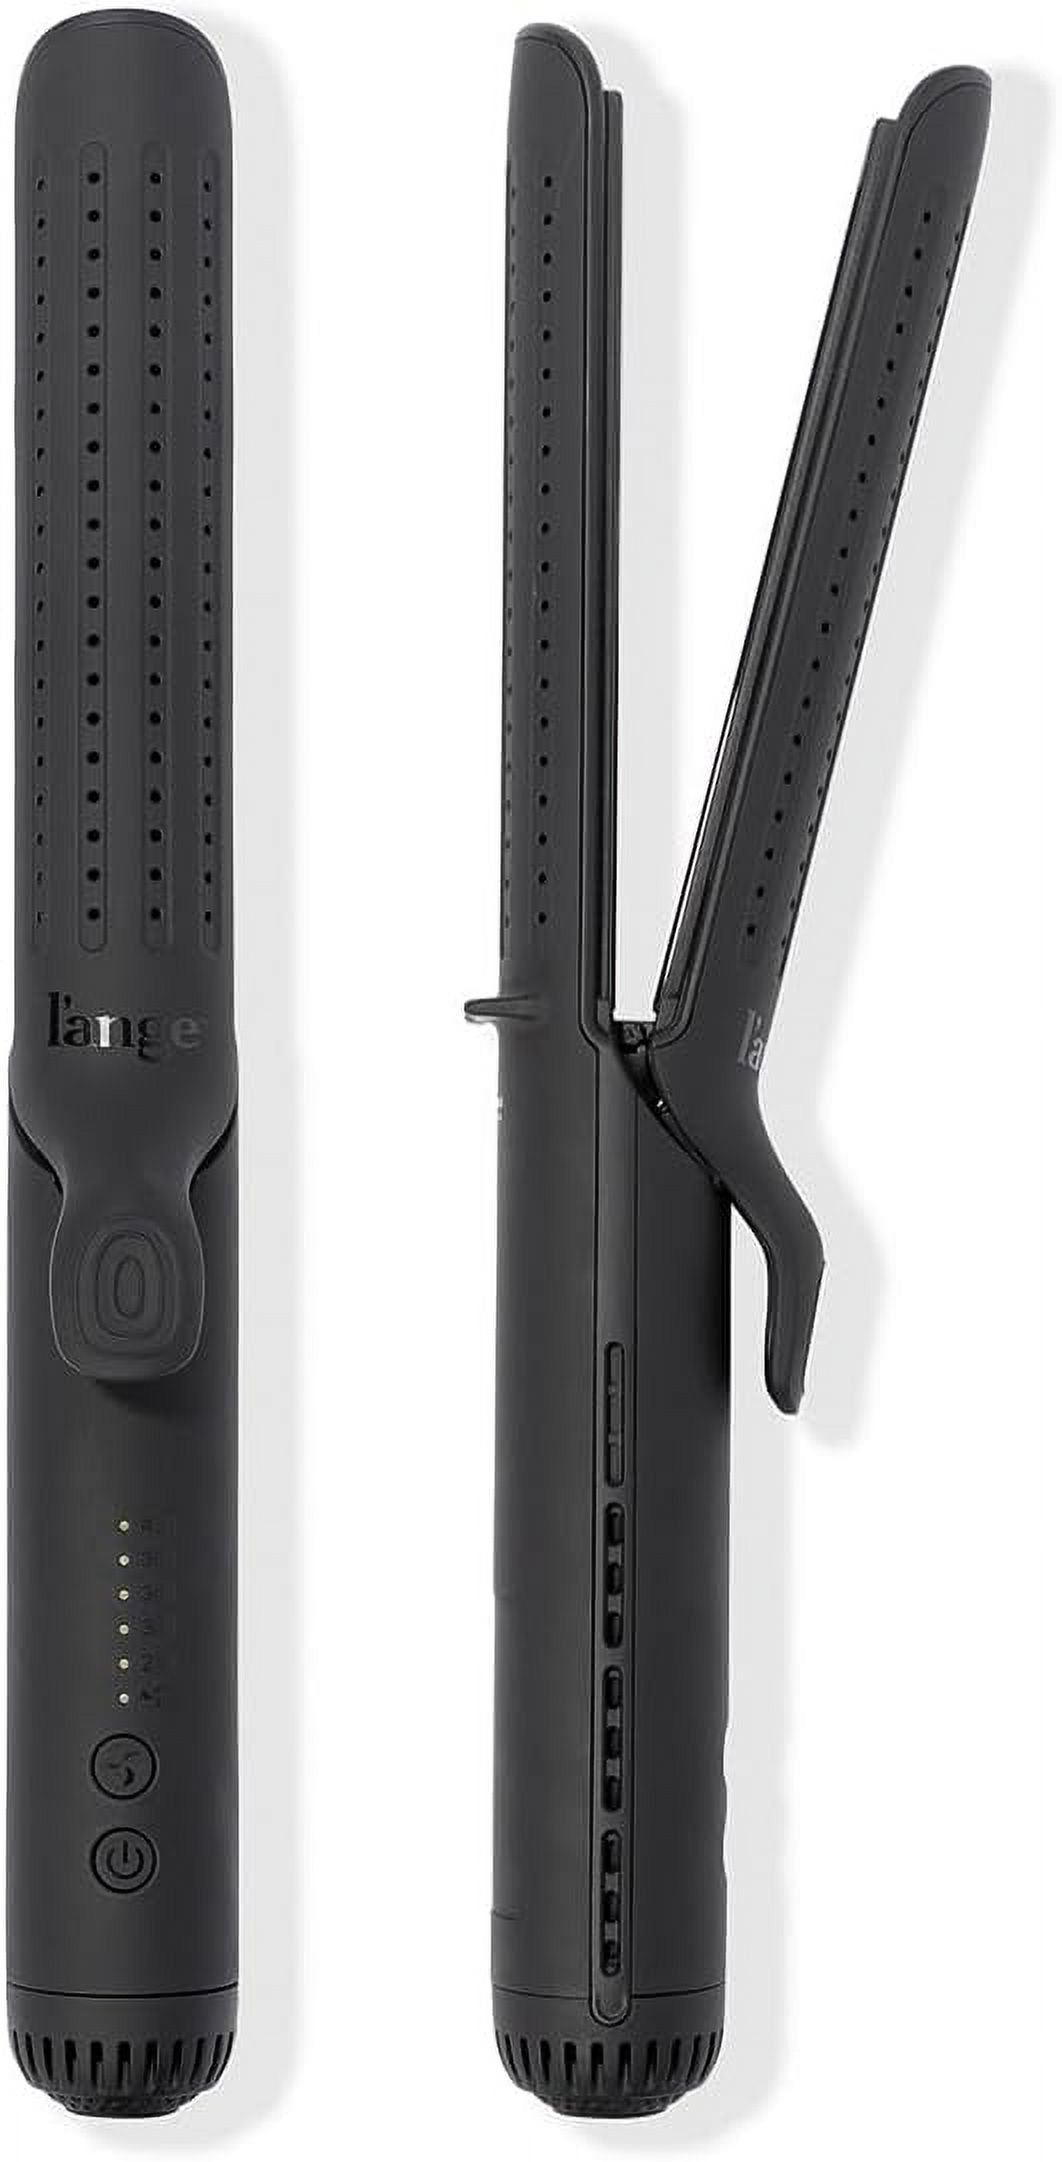 L'ange Hair Le Duo Grande 360° Airflow Styler | 2-in-1 Curling Wand & Titanium Flat Iron Hair Straightener - image 1 of 9